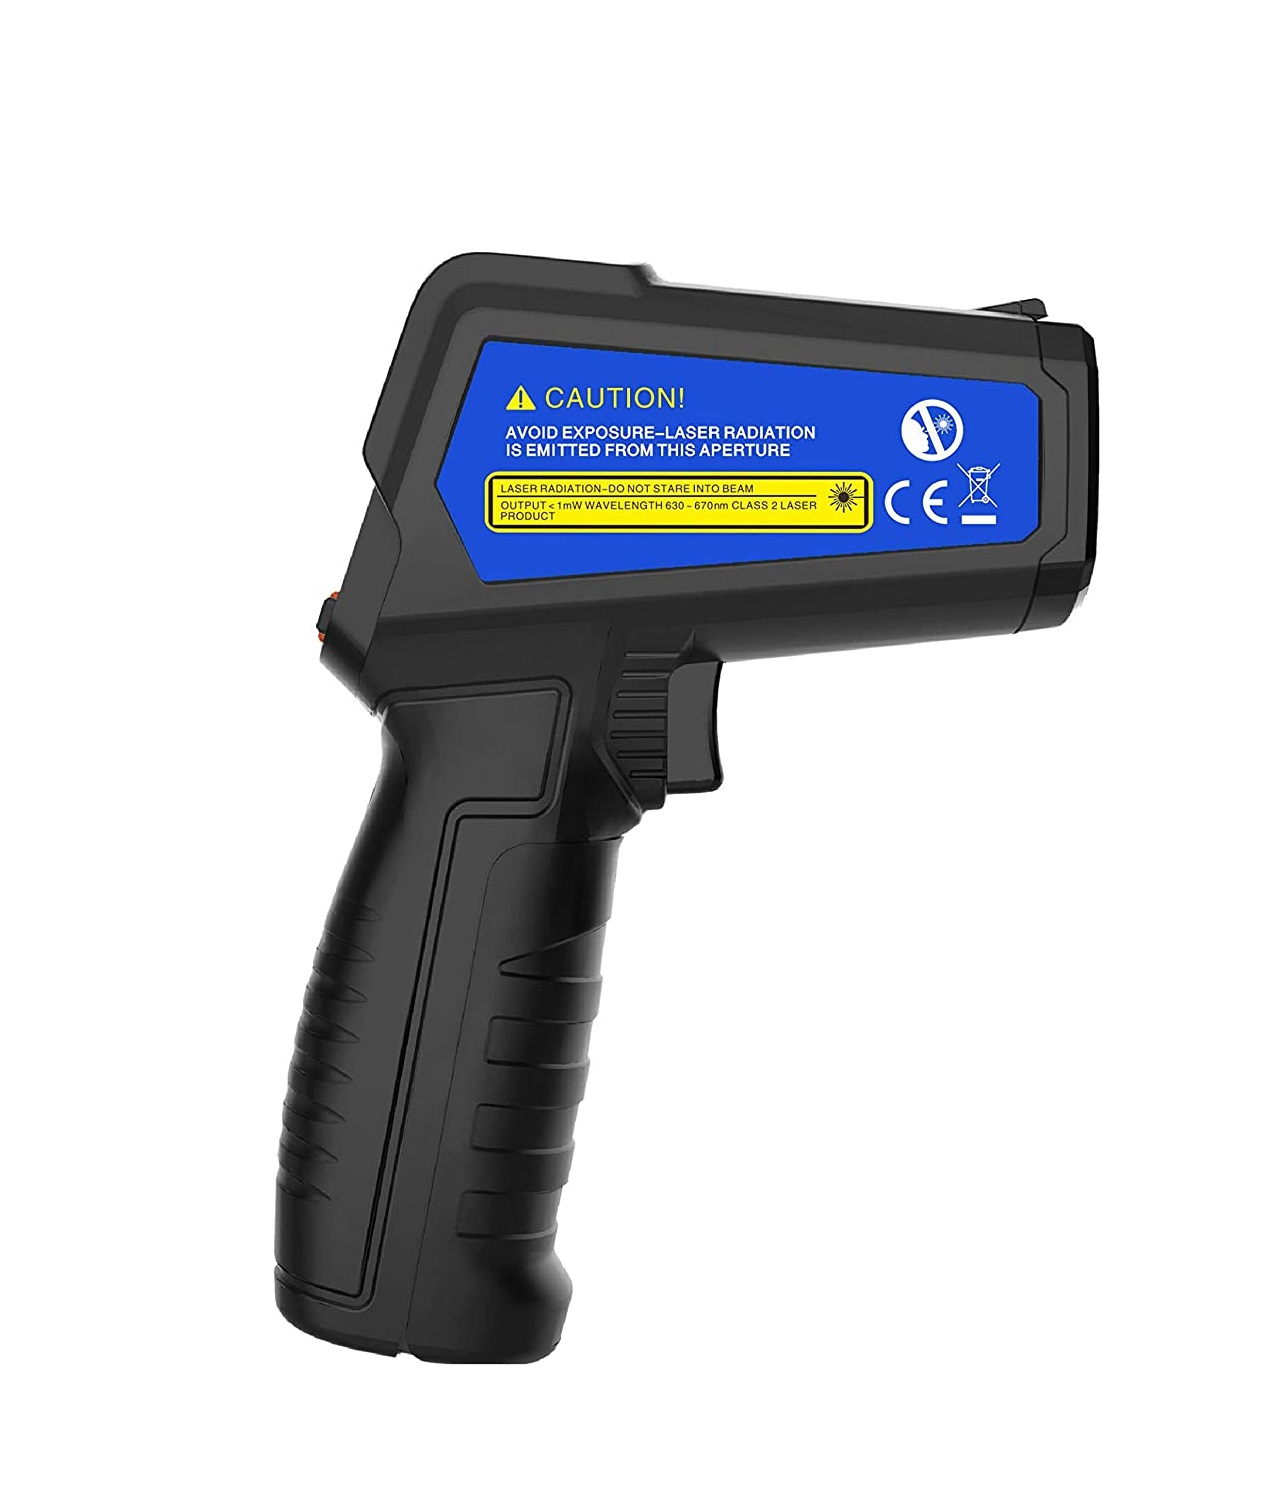 Mextech DT8811Digital Infrared Thermometer With Color Display